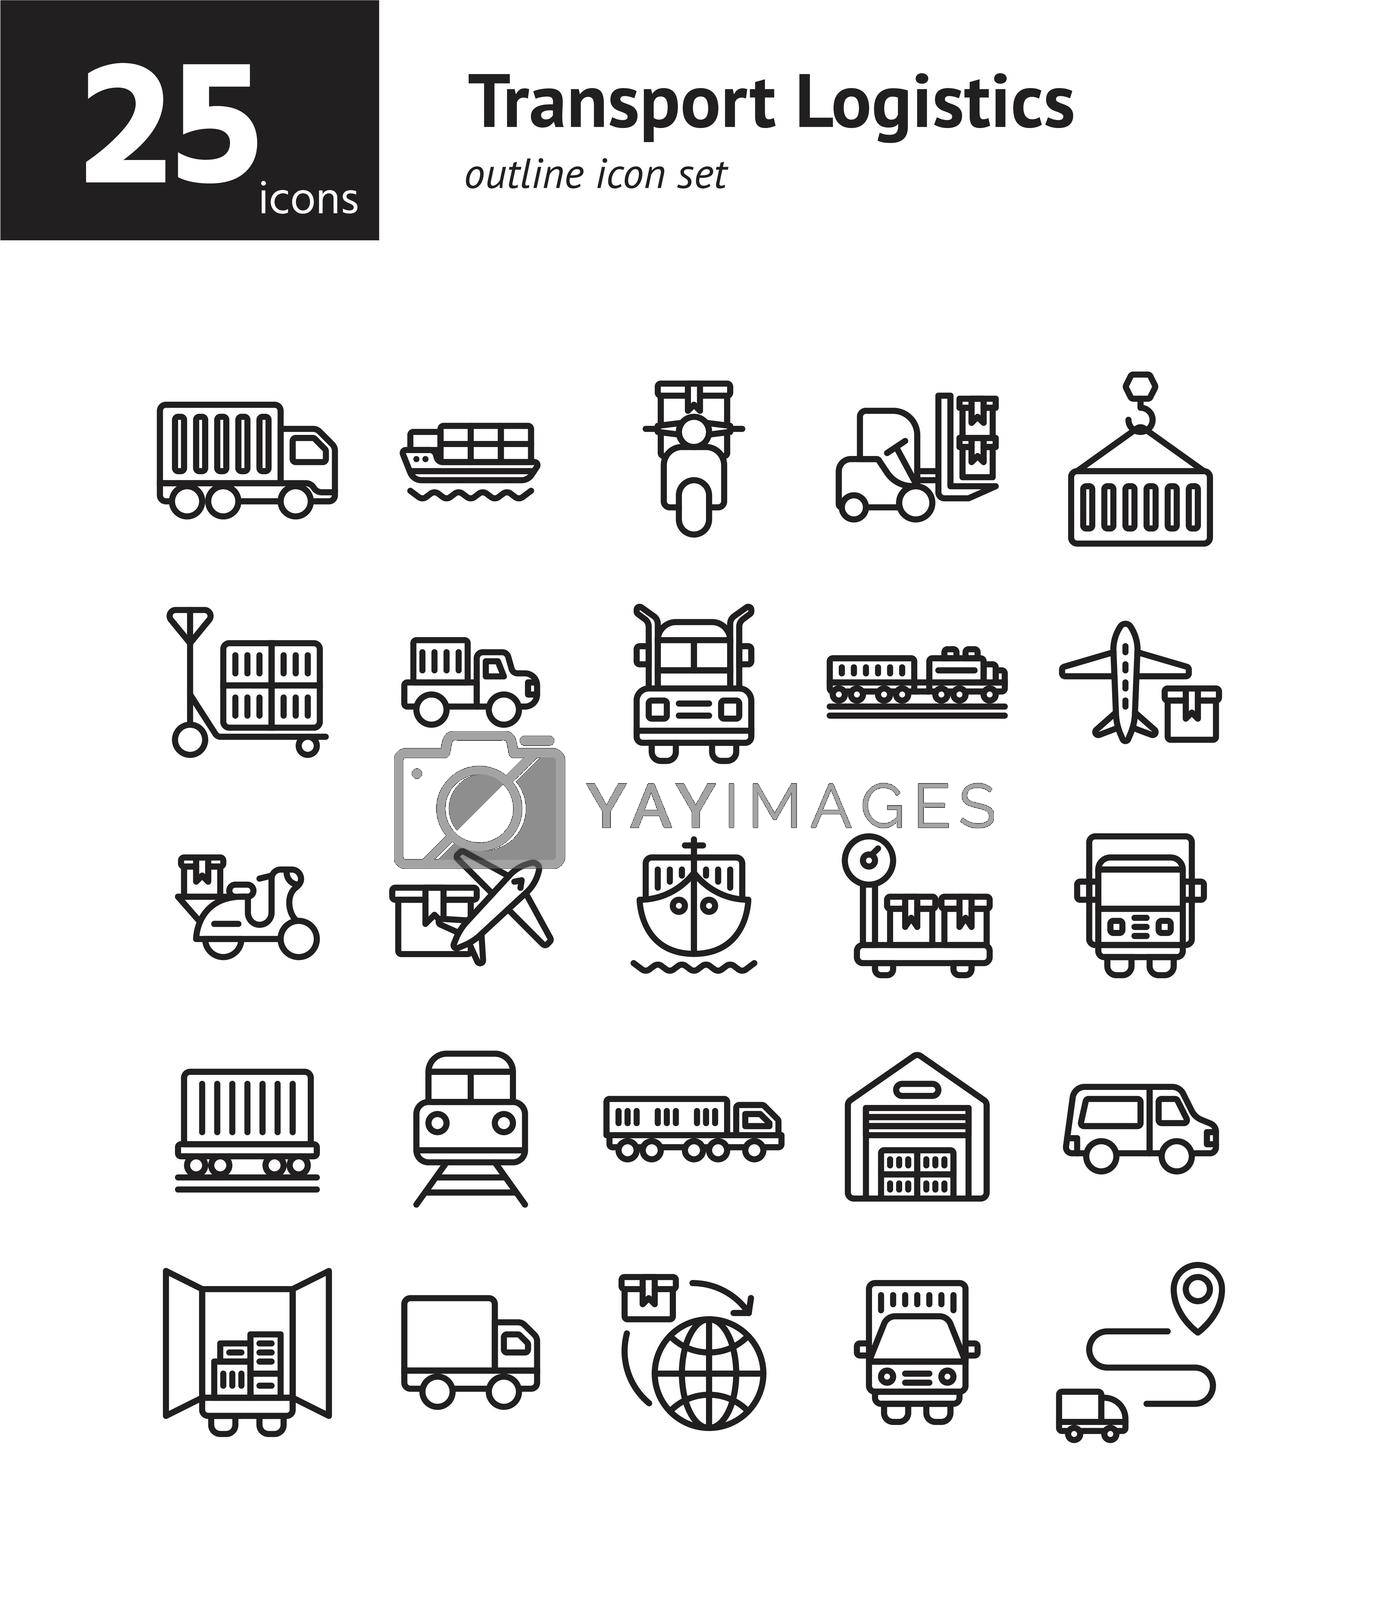 Royalty free image of Transport Logistics outline icon set. by doraclub